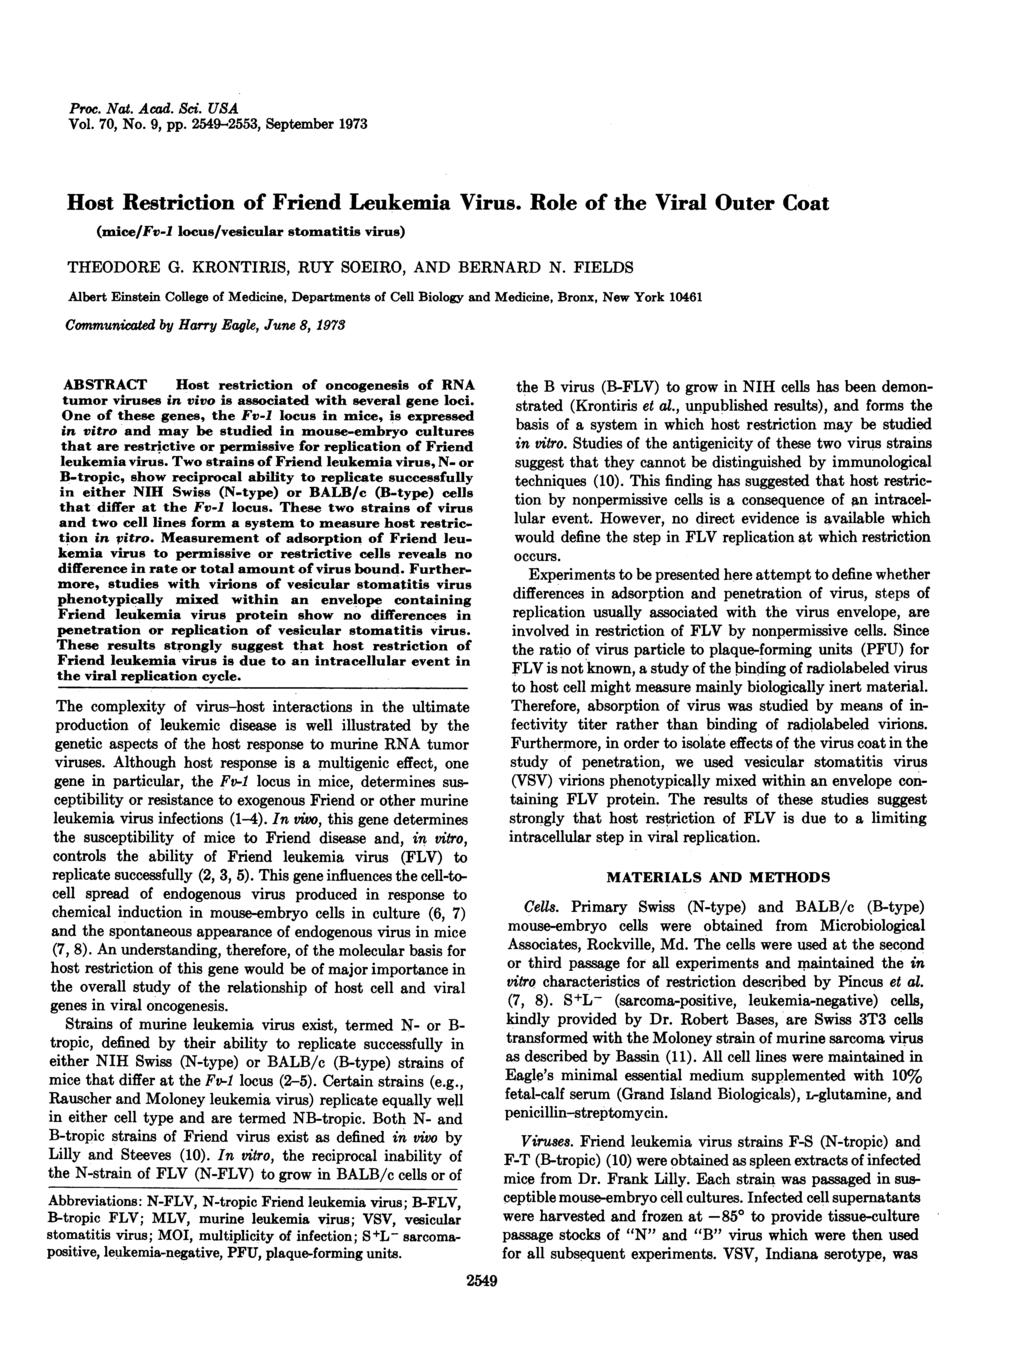 Proc. Nat. Acad. Sci. USA Vol. 70, No. 9, pp. 2549-2553, September 1973 Host Restriction of Friend Leukemia Virus. Role of the Viral Outer Coat (mice/fv-1 locus/vesicular stomatitis virus) THEODORE G.